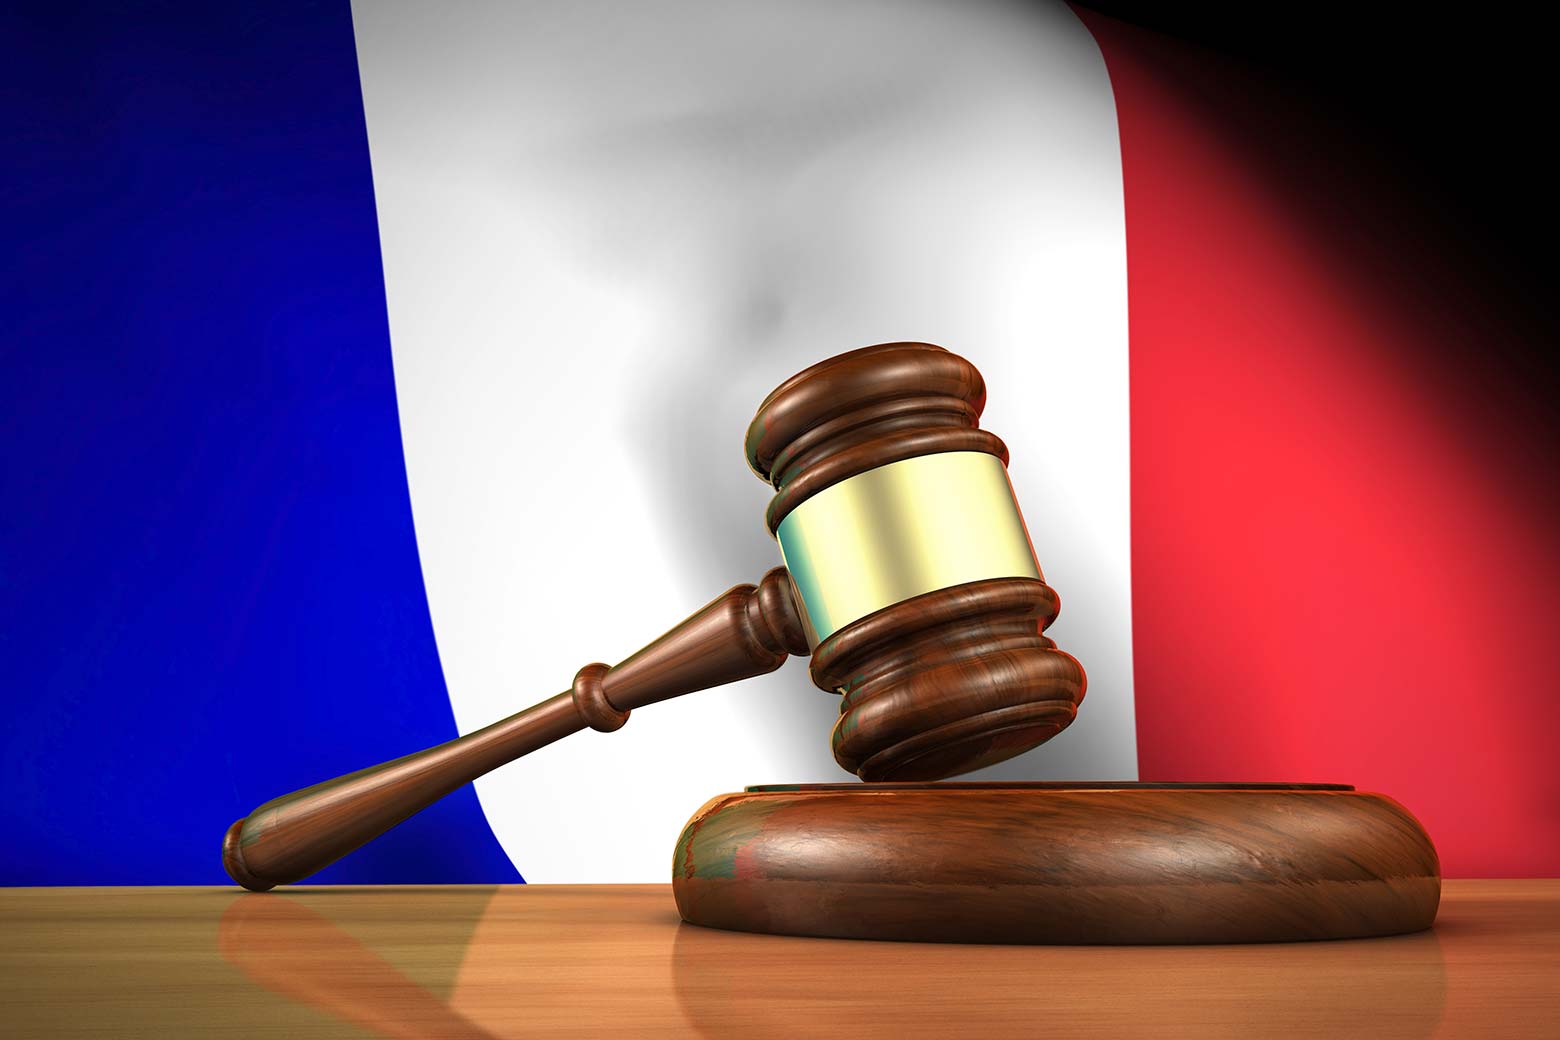 A gavel in front of the French flag.